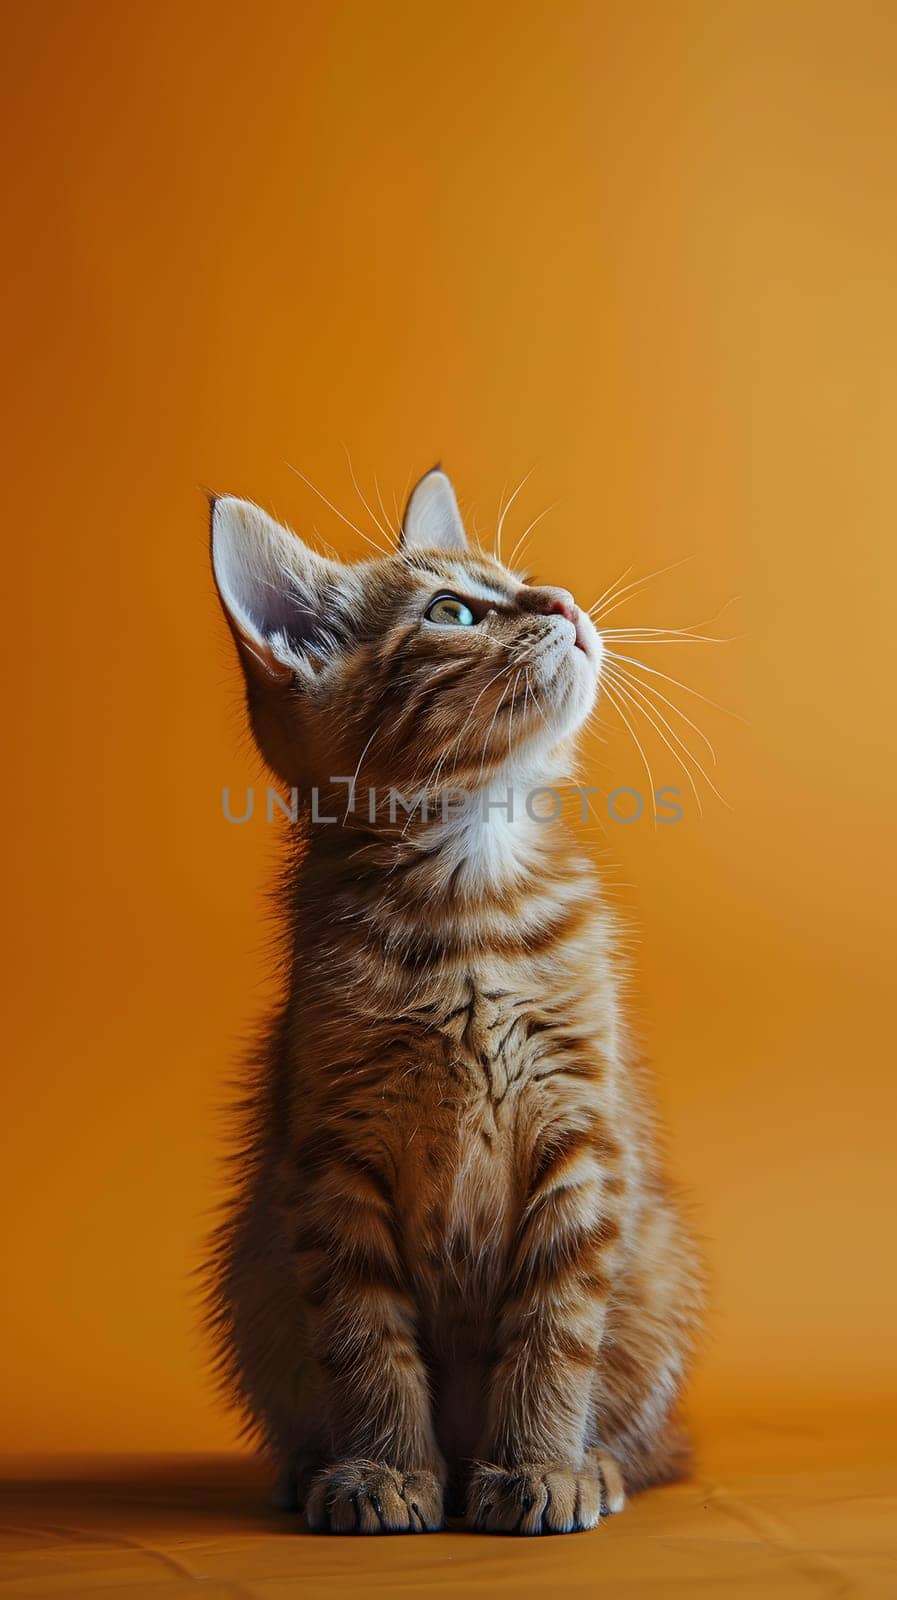 A small to mediumsized Felidae, the domestic shorthaired cat, is sitting on a table gazing up at the sky with its whiskers twitching and fur shining in the sunlight